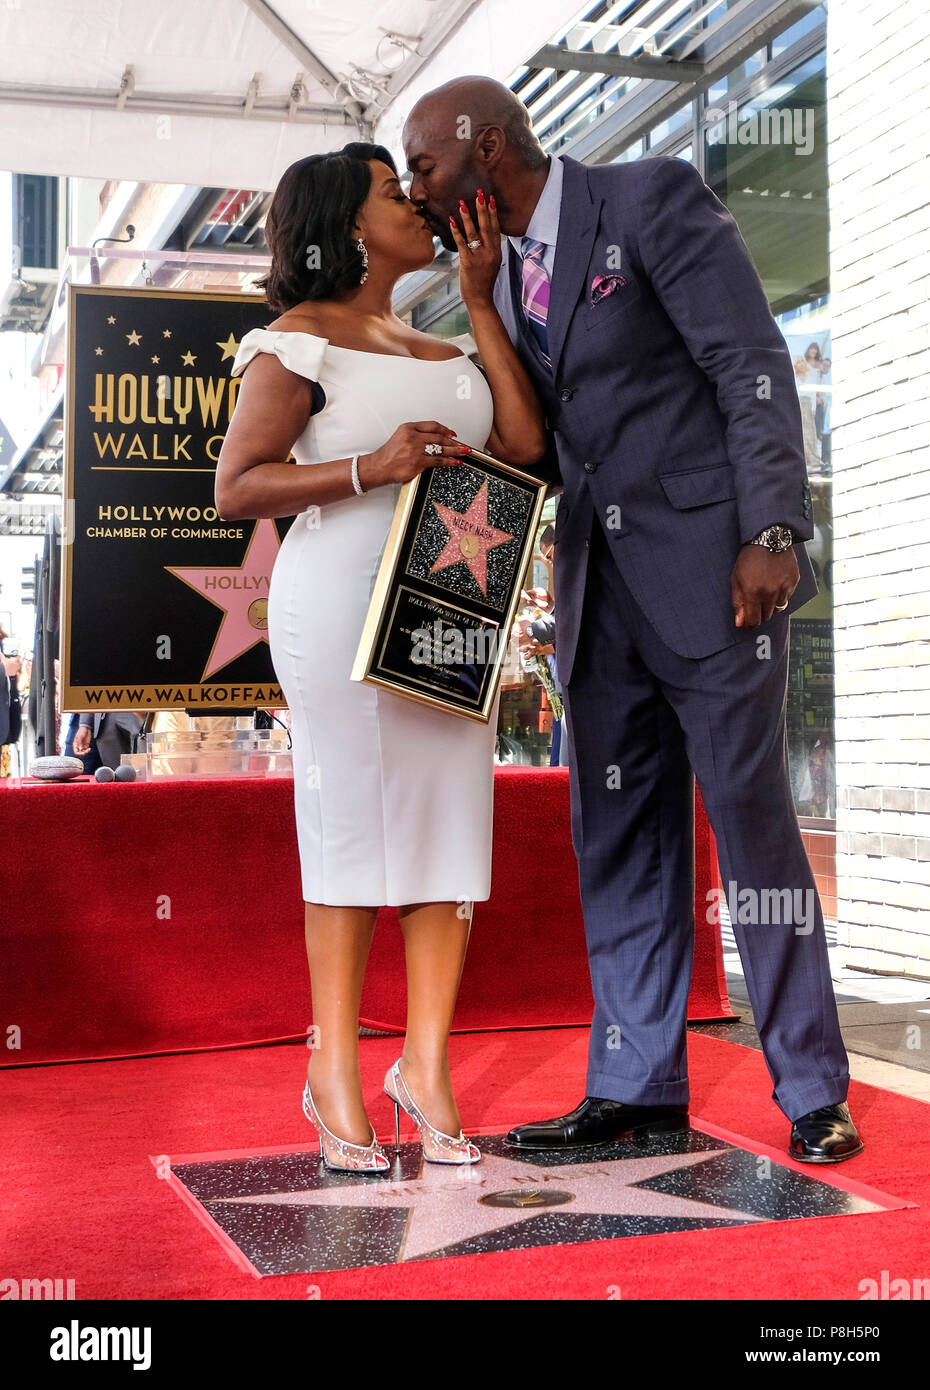 Los Angeles, USA. 11th July, 2018. American actress Niecy Nash kisses her husband Jay Tucker at her star dedication ceremony at the Hollywood Walk of Fame in Los Angeles, the United States, on July 11, 2018. Credit: Zhao Hanrong/Xinhua/Alamy Live News Stock Photo